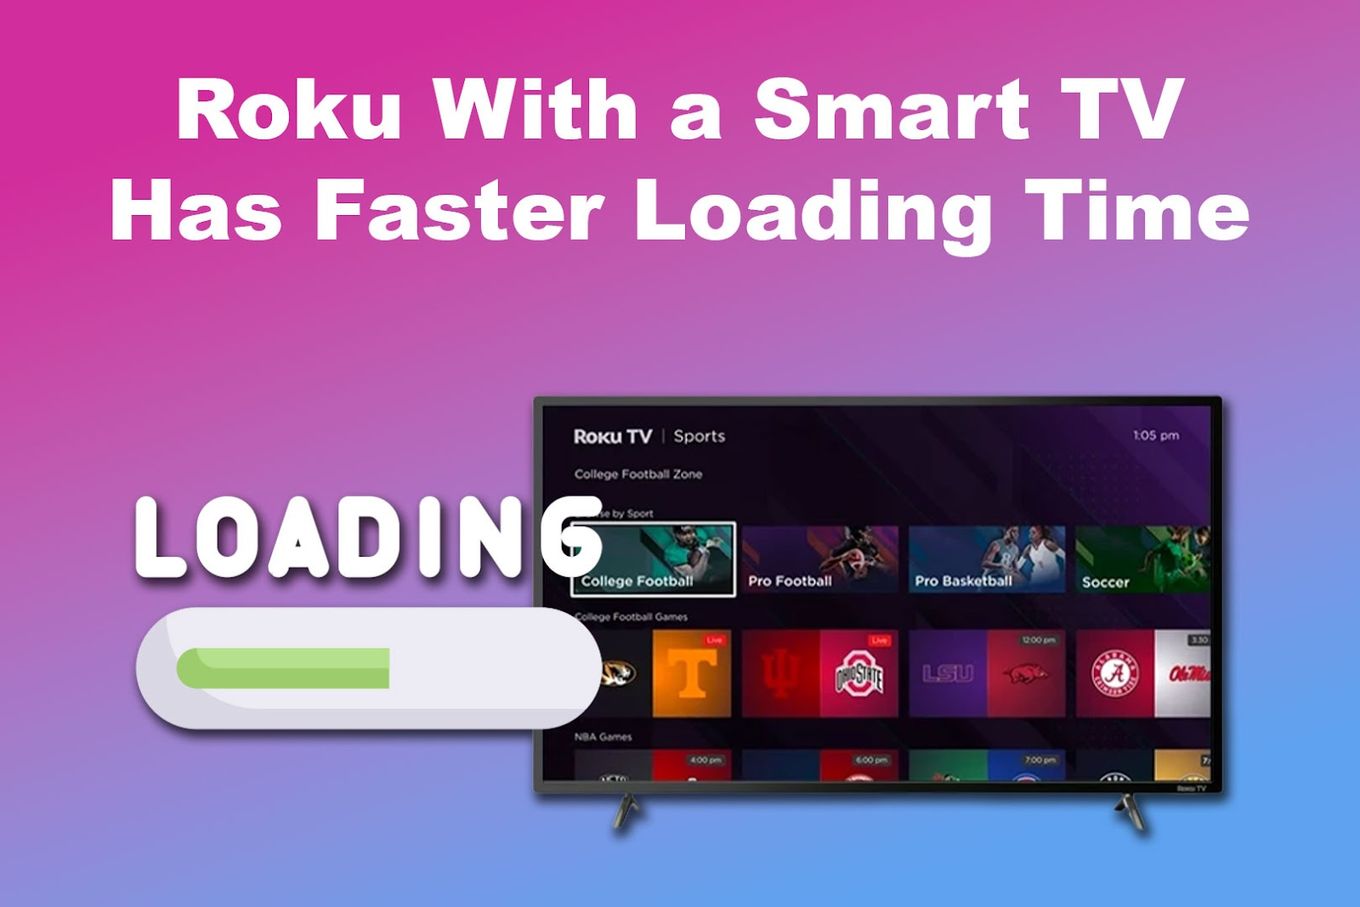 Roku With a Smart TV Has Faster Loading Time